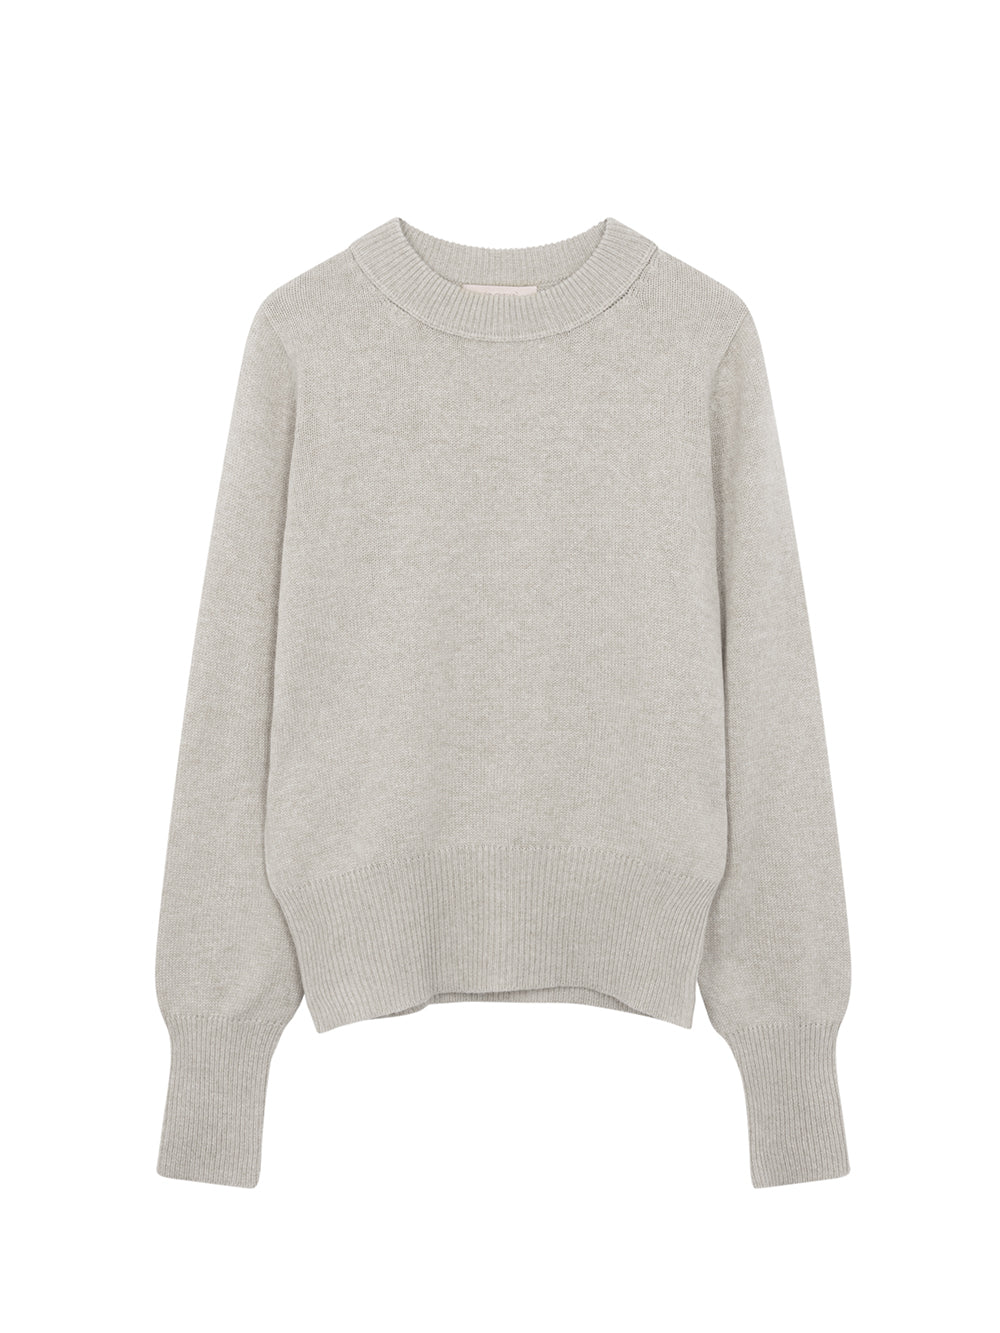 COUTURE SWEATER CASHMERE